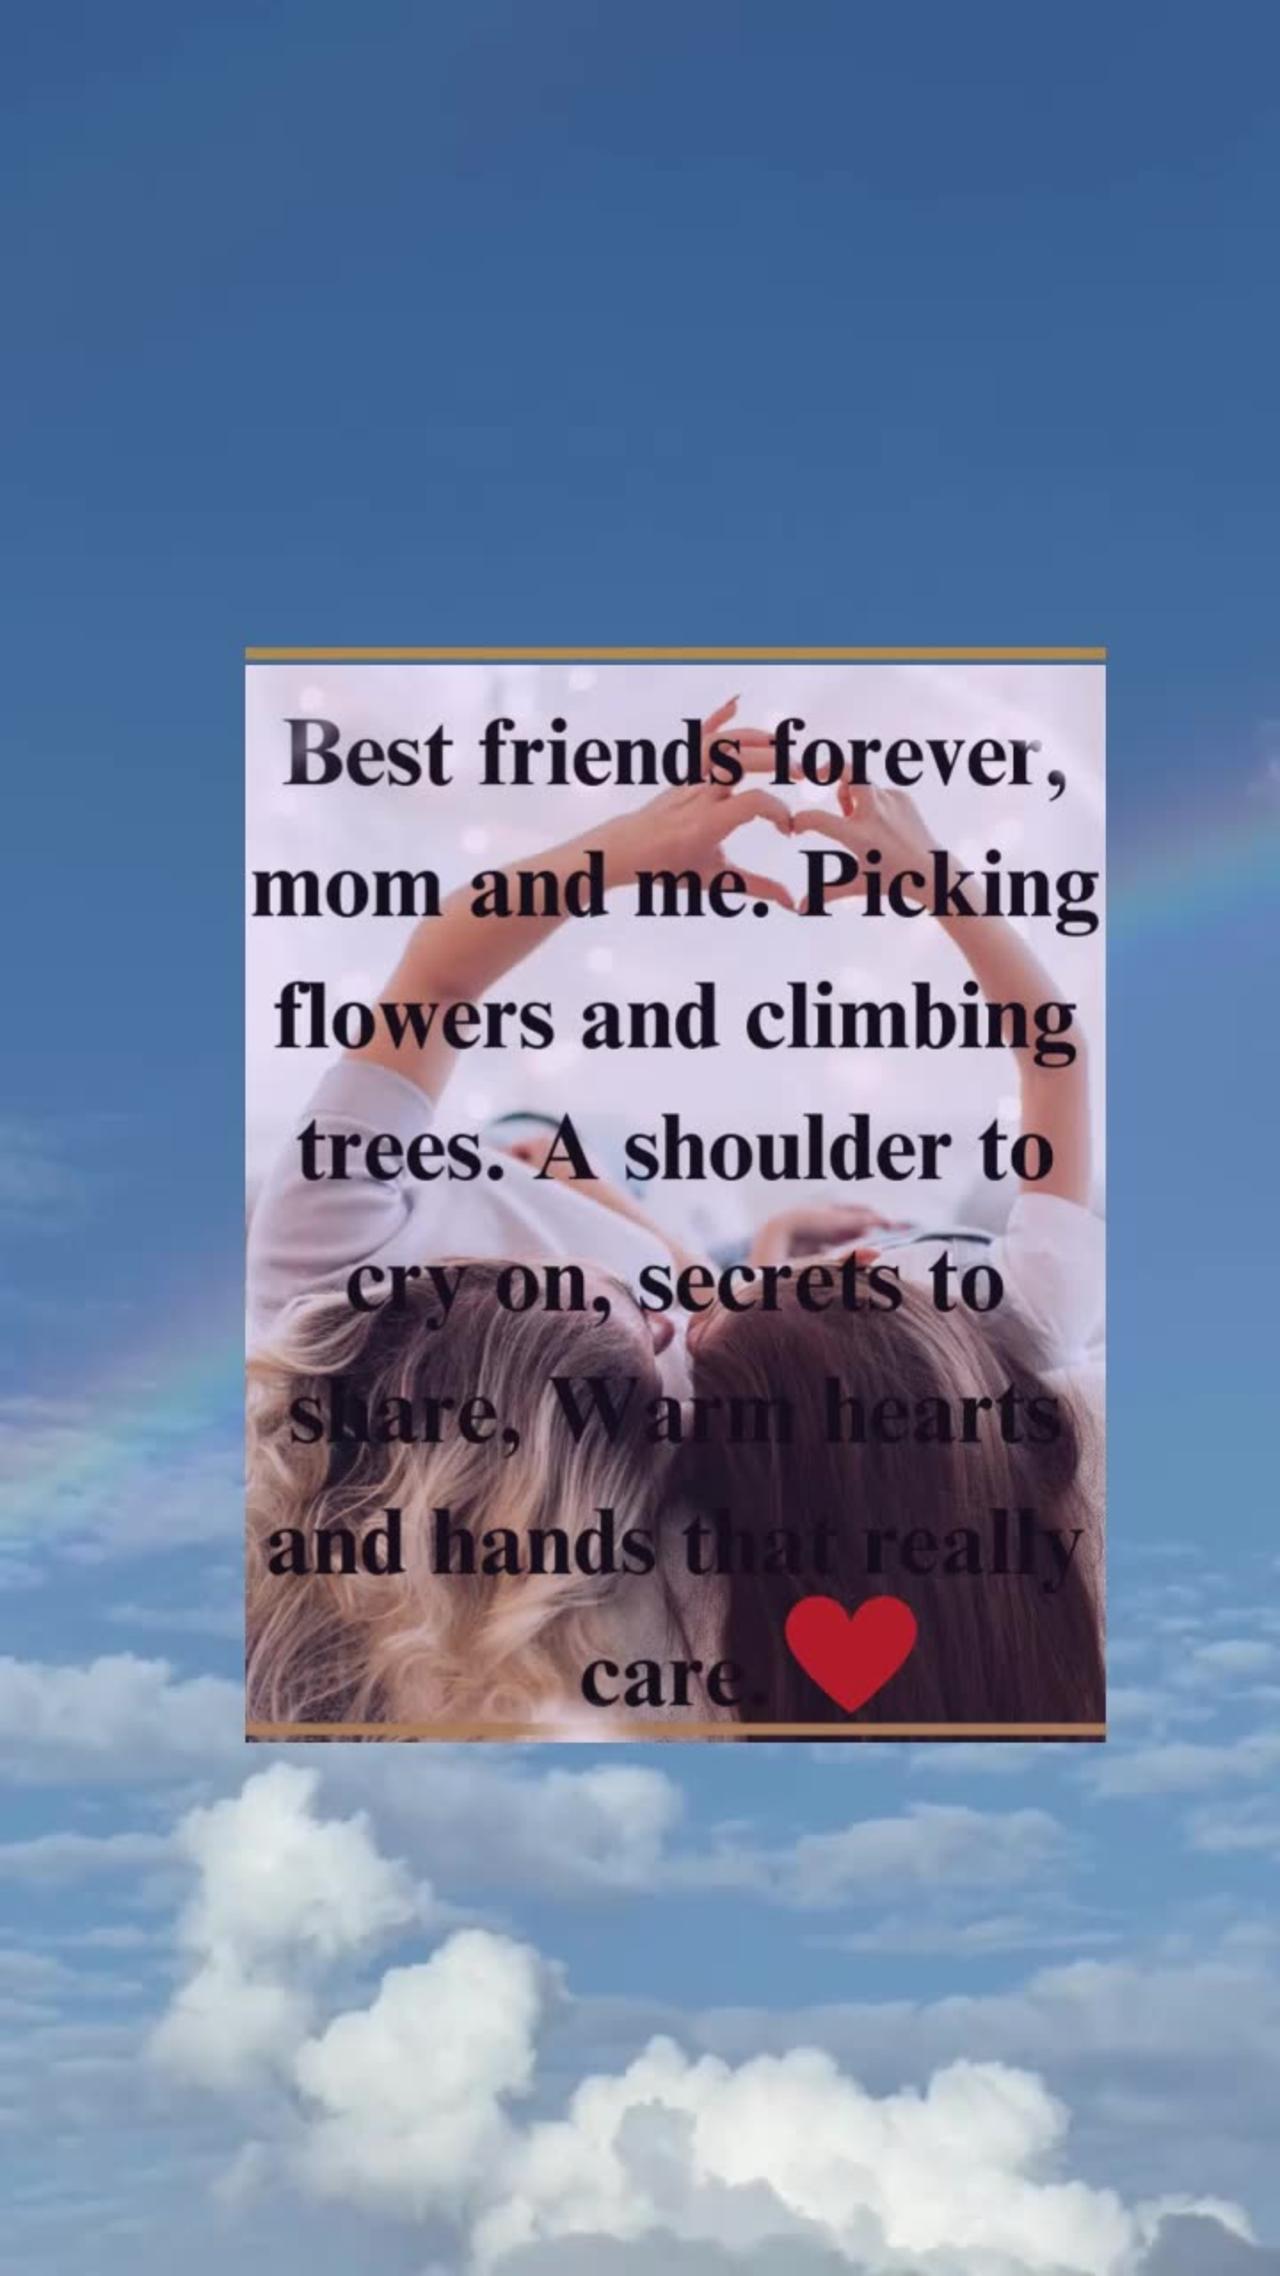 Friend forever – One News Page VIDEO